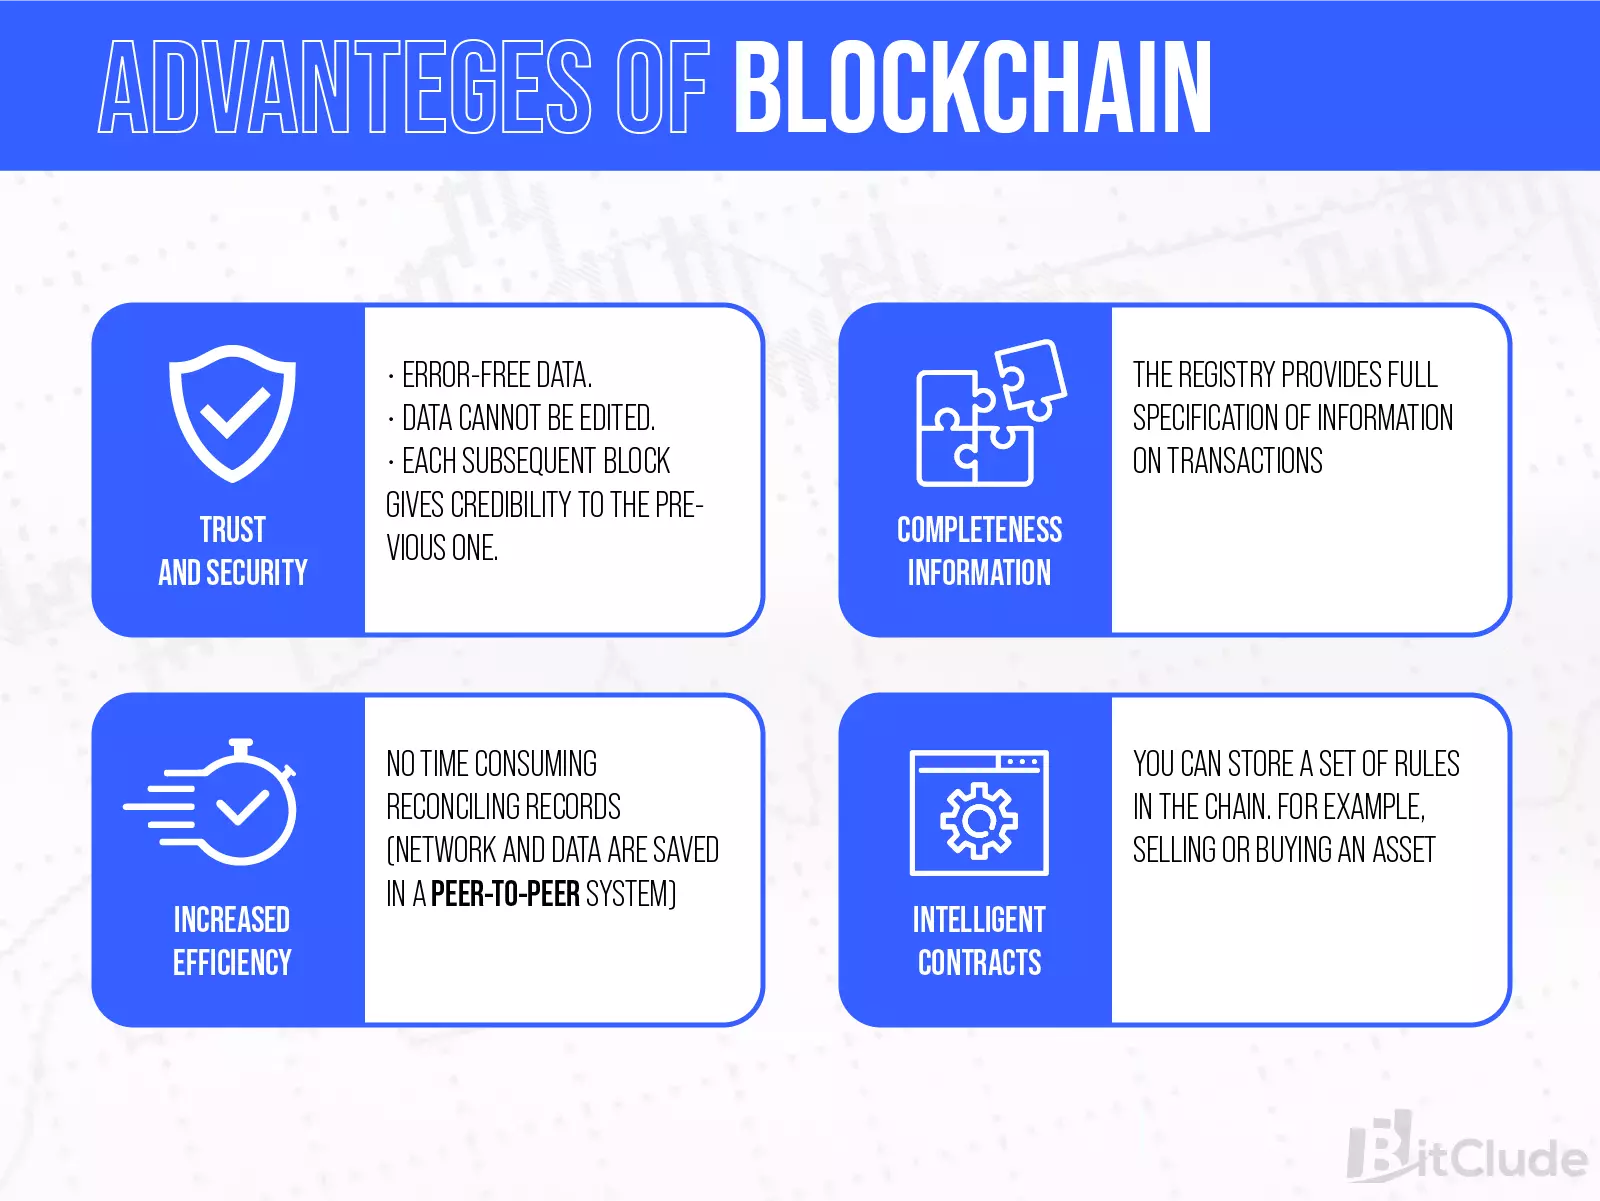 The advantages of Blockchain technology are high security, irreversibility and uneditability of information from the past and the possibility of creating smart contracts.